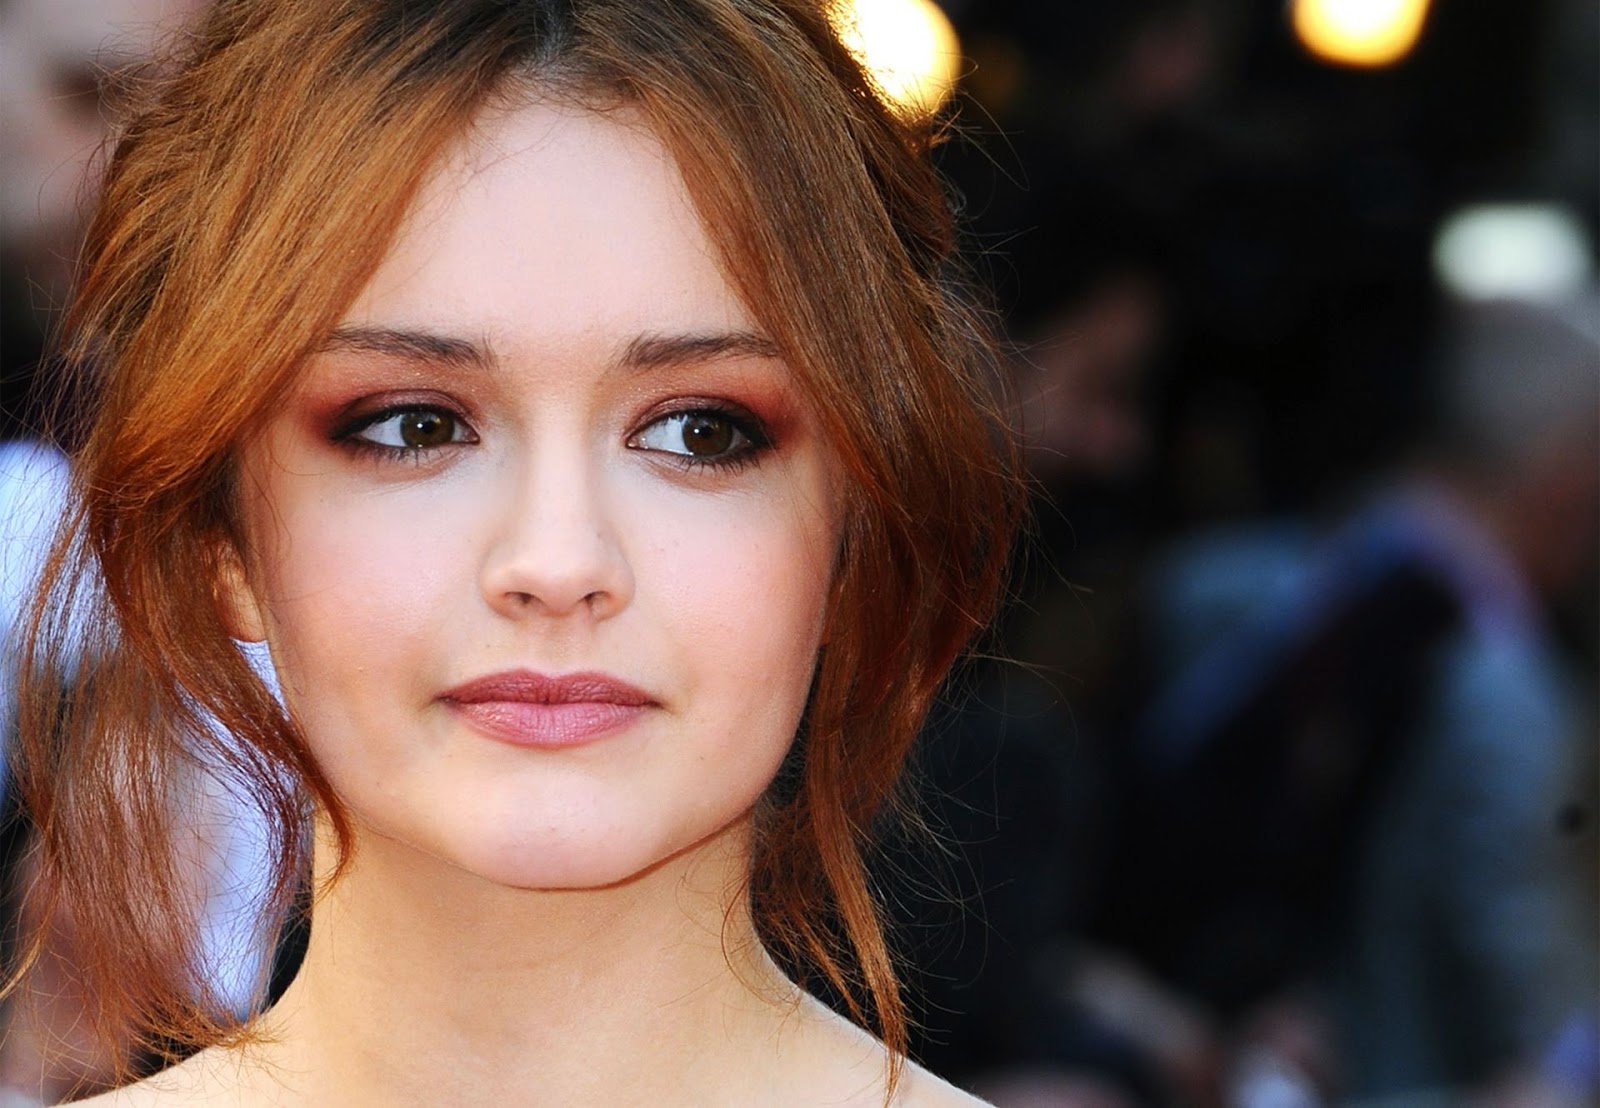 Olivia Cooke Upcoming Movies 2016 'The Limehouse Golem' Find on wikipedia, imdb, Facebook, Twitter, Google Plus